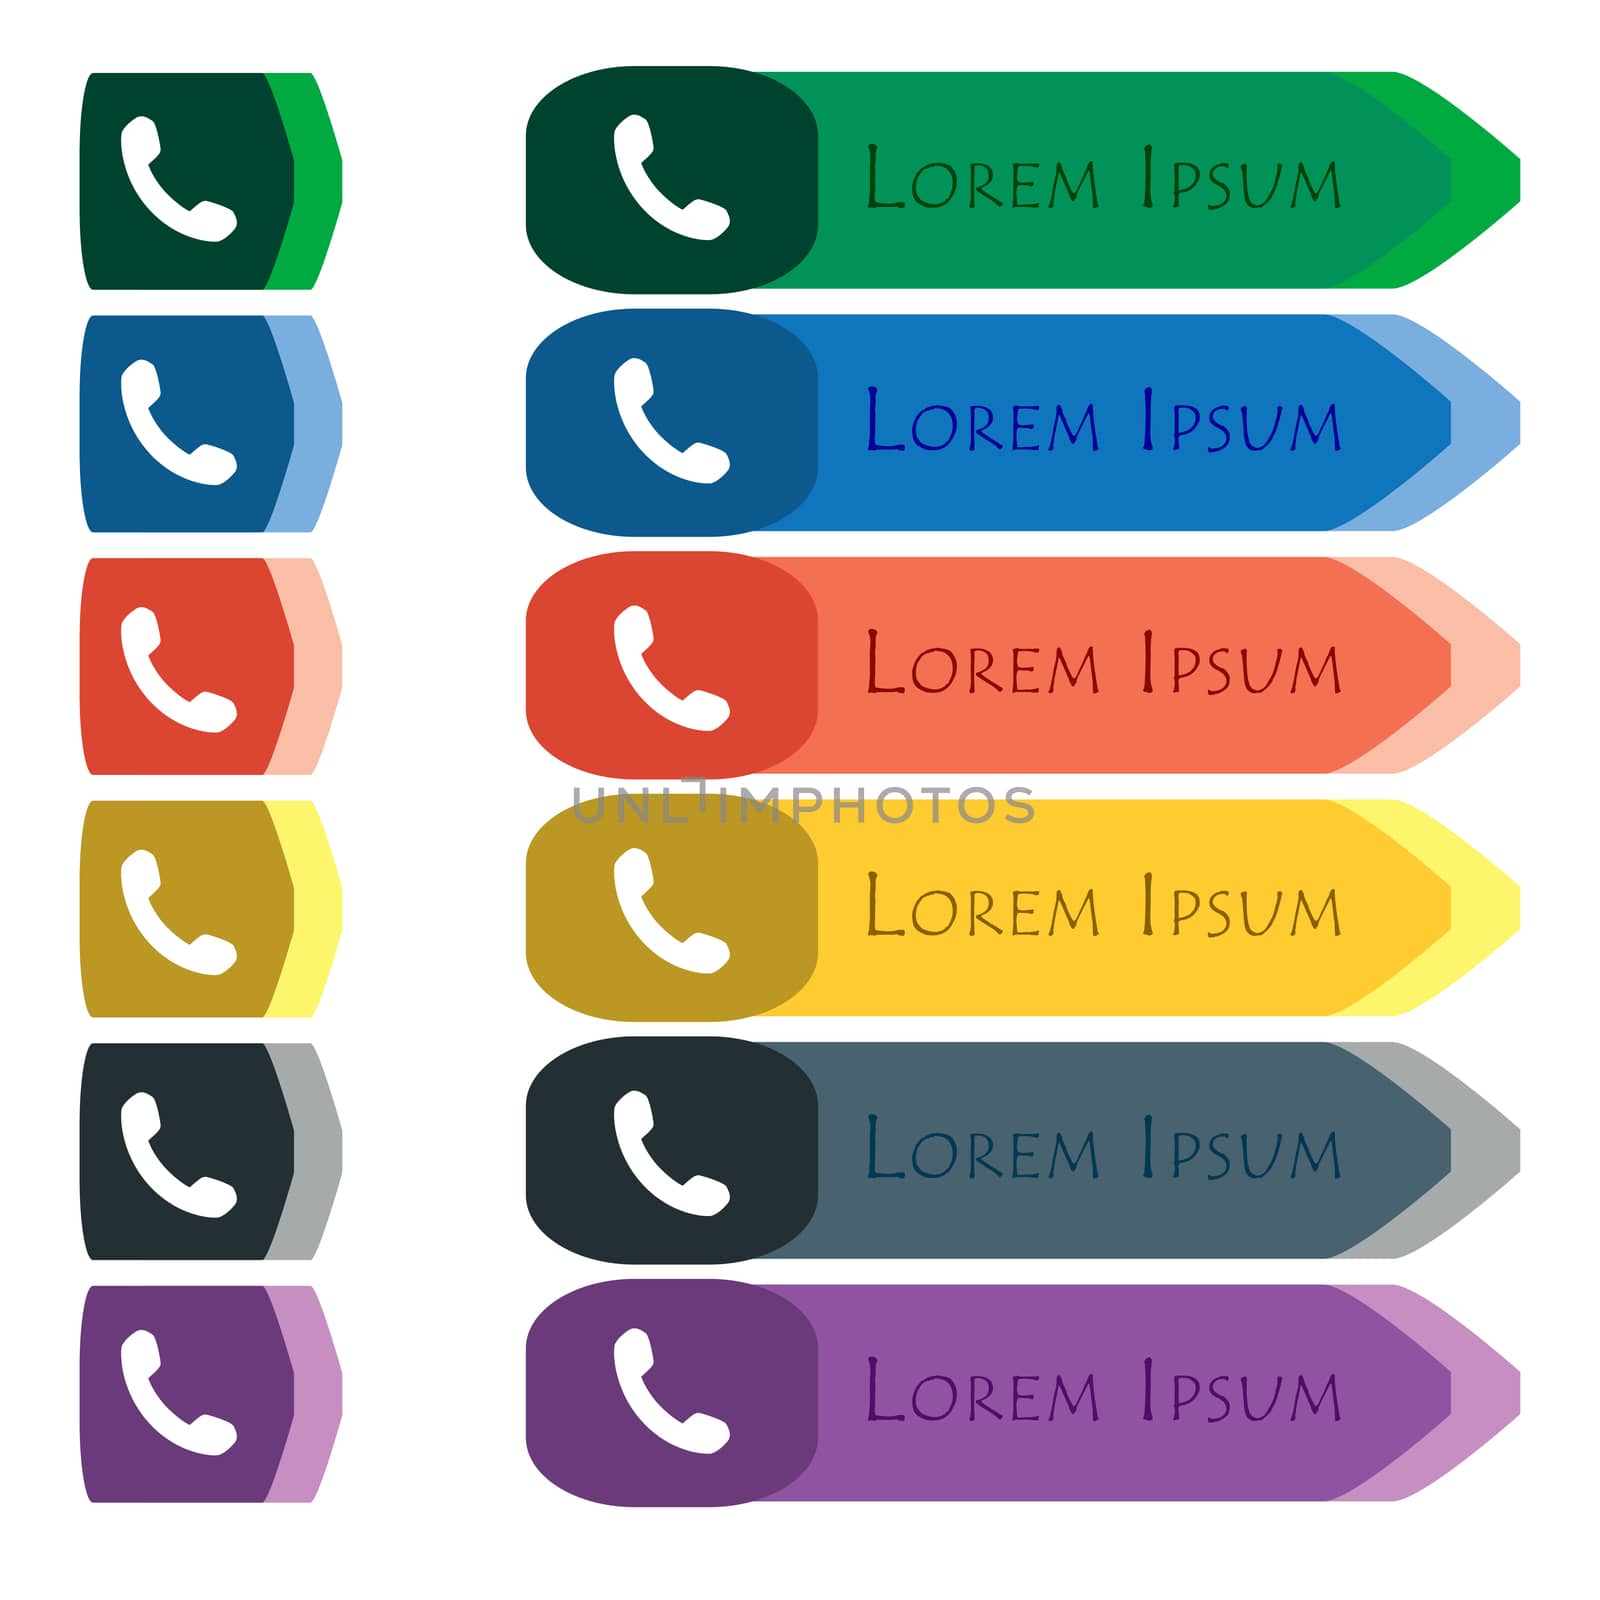 Phone, Support, Call center icon sign. Set of colorful, bright long buttons with additional small modules. Flat design by serhii_lohvyniuk